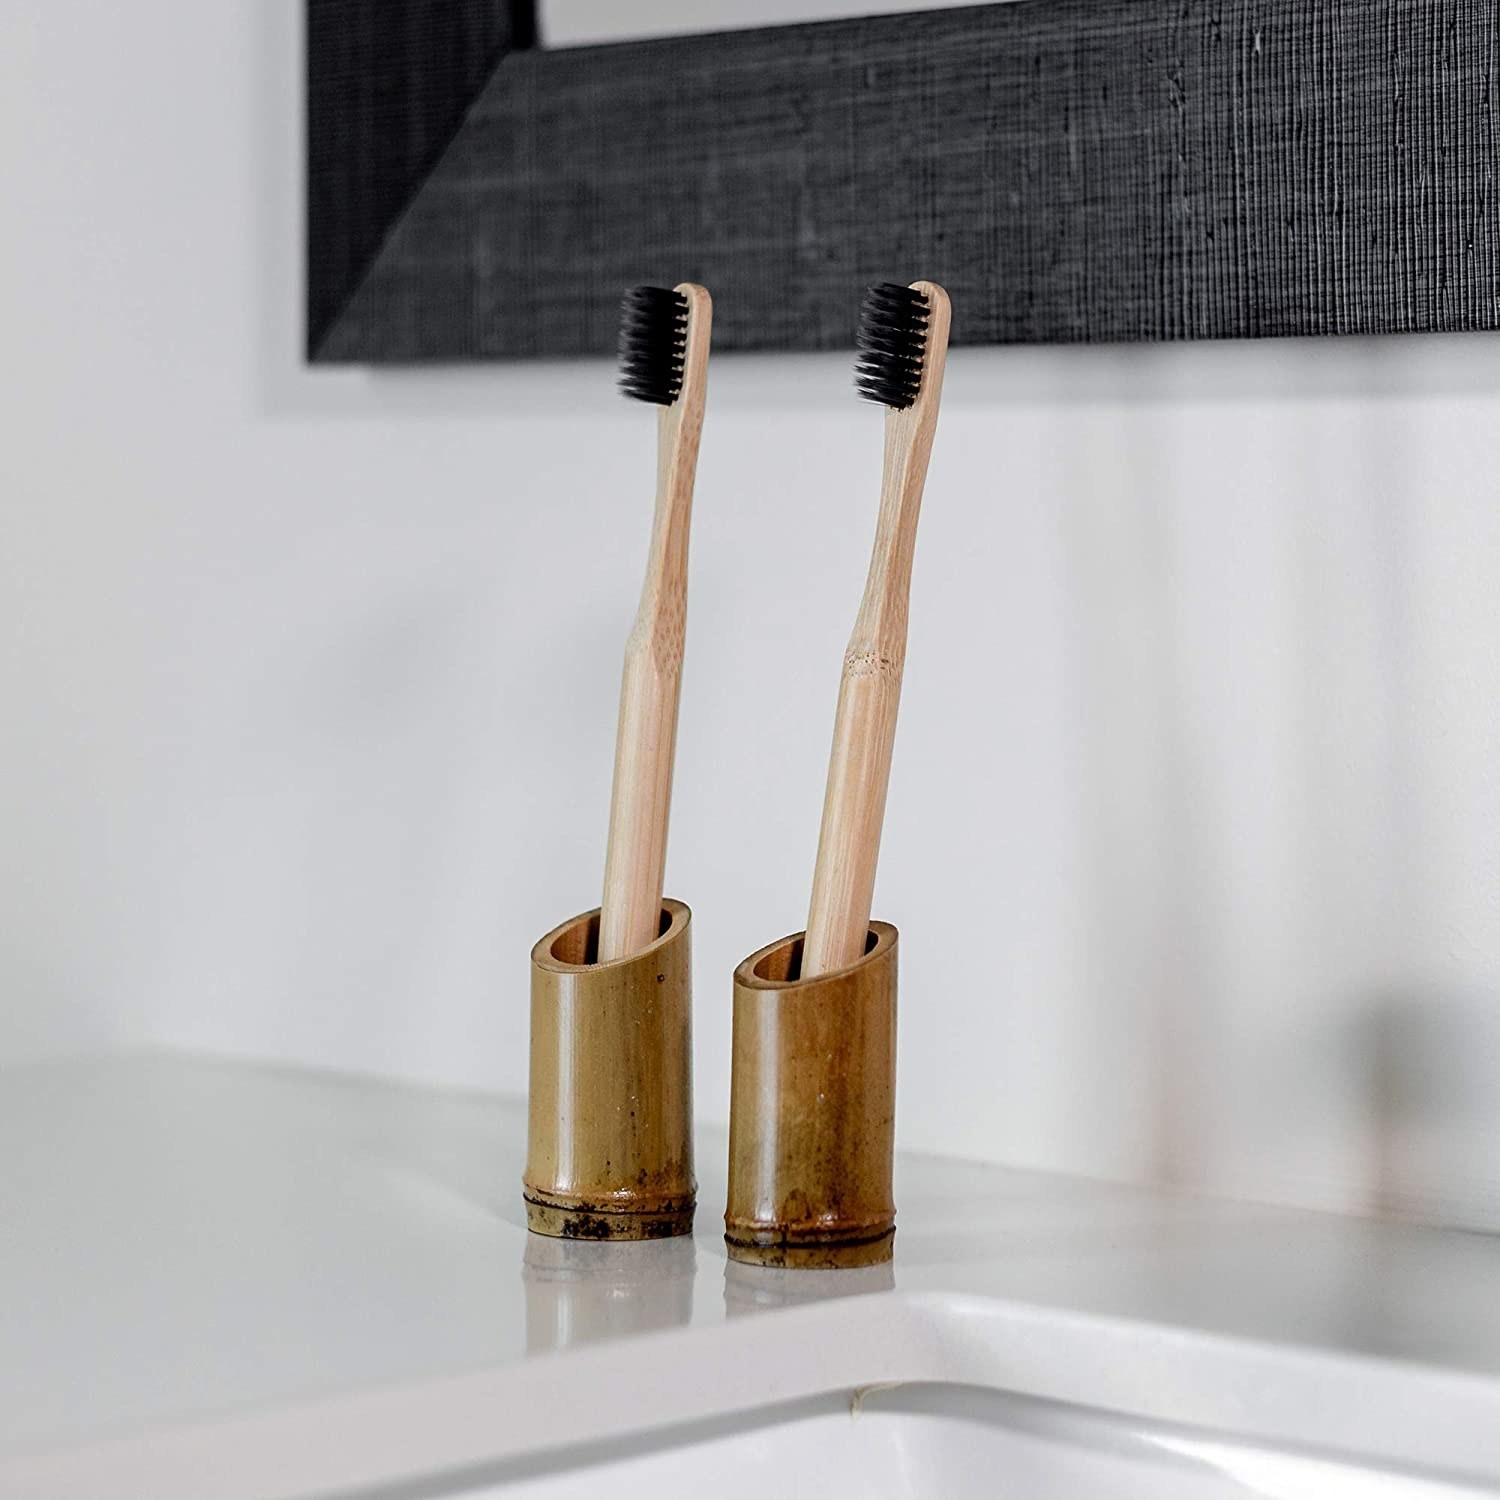 Two bamboo toothbrushes on the edge of a sink in their bamboo holders